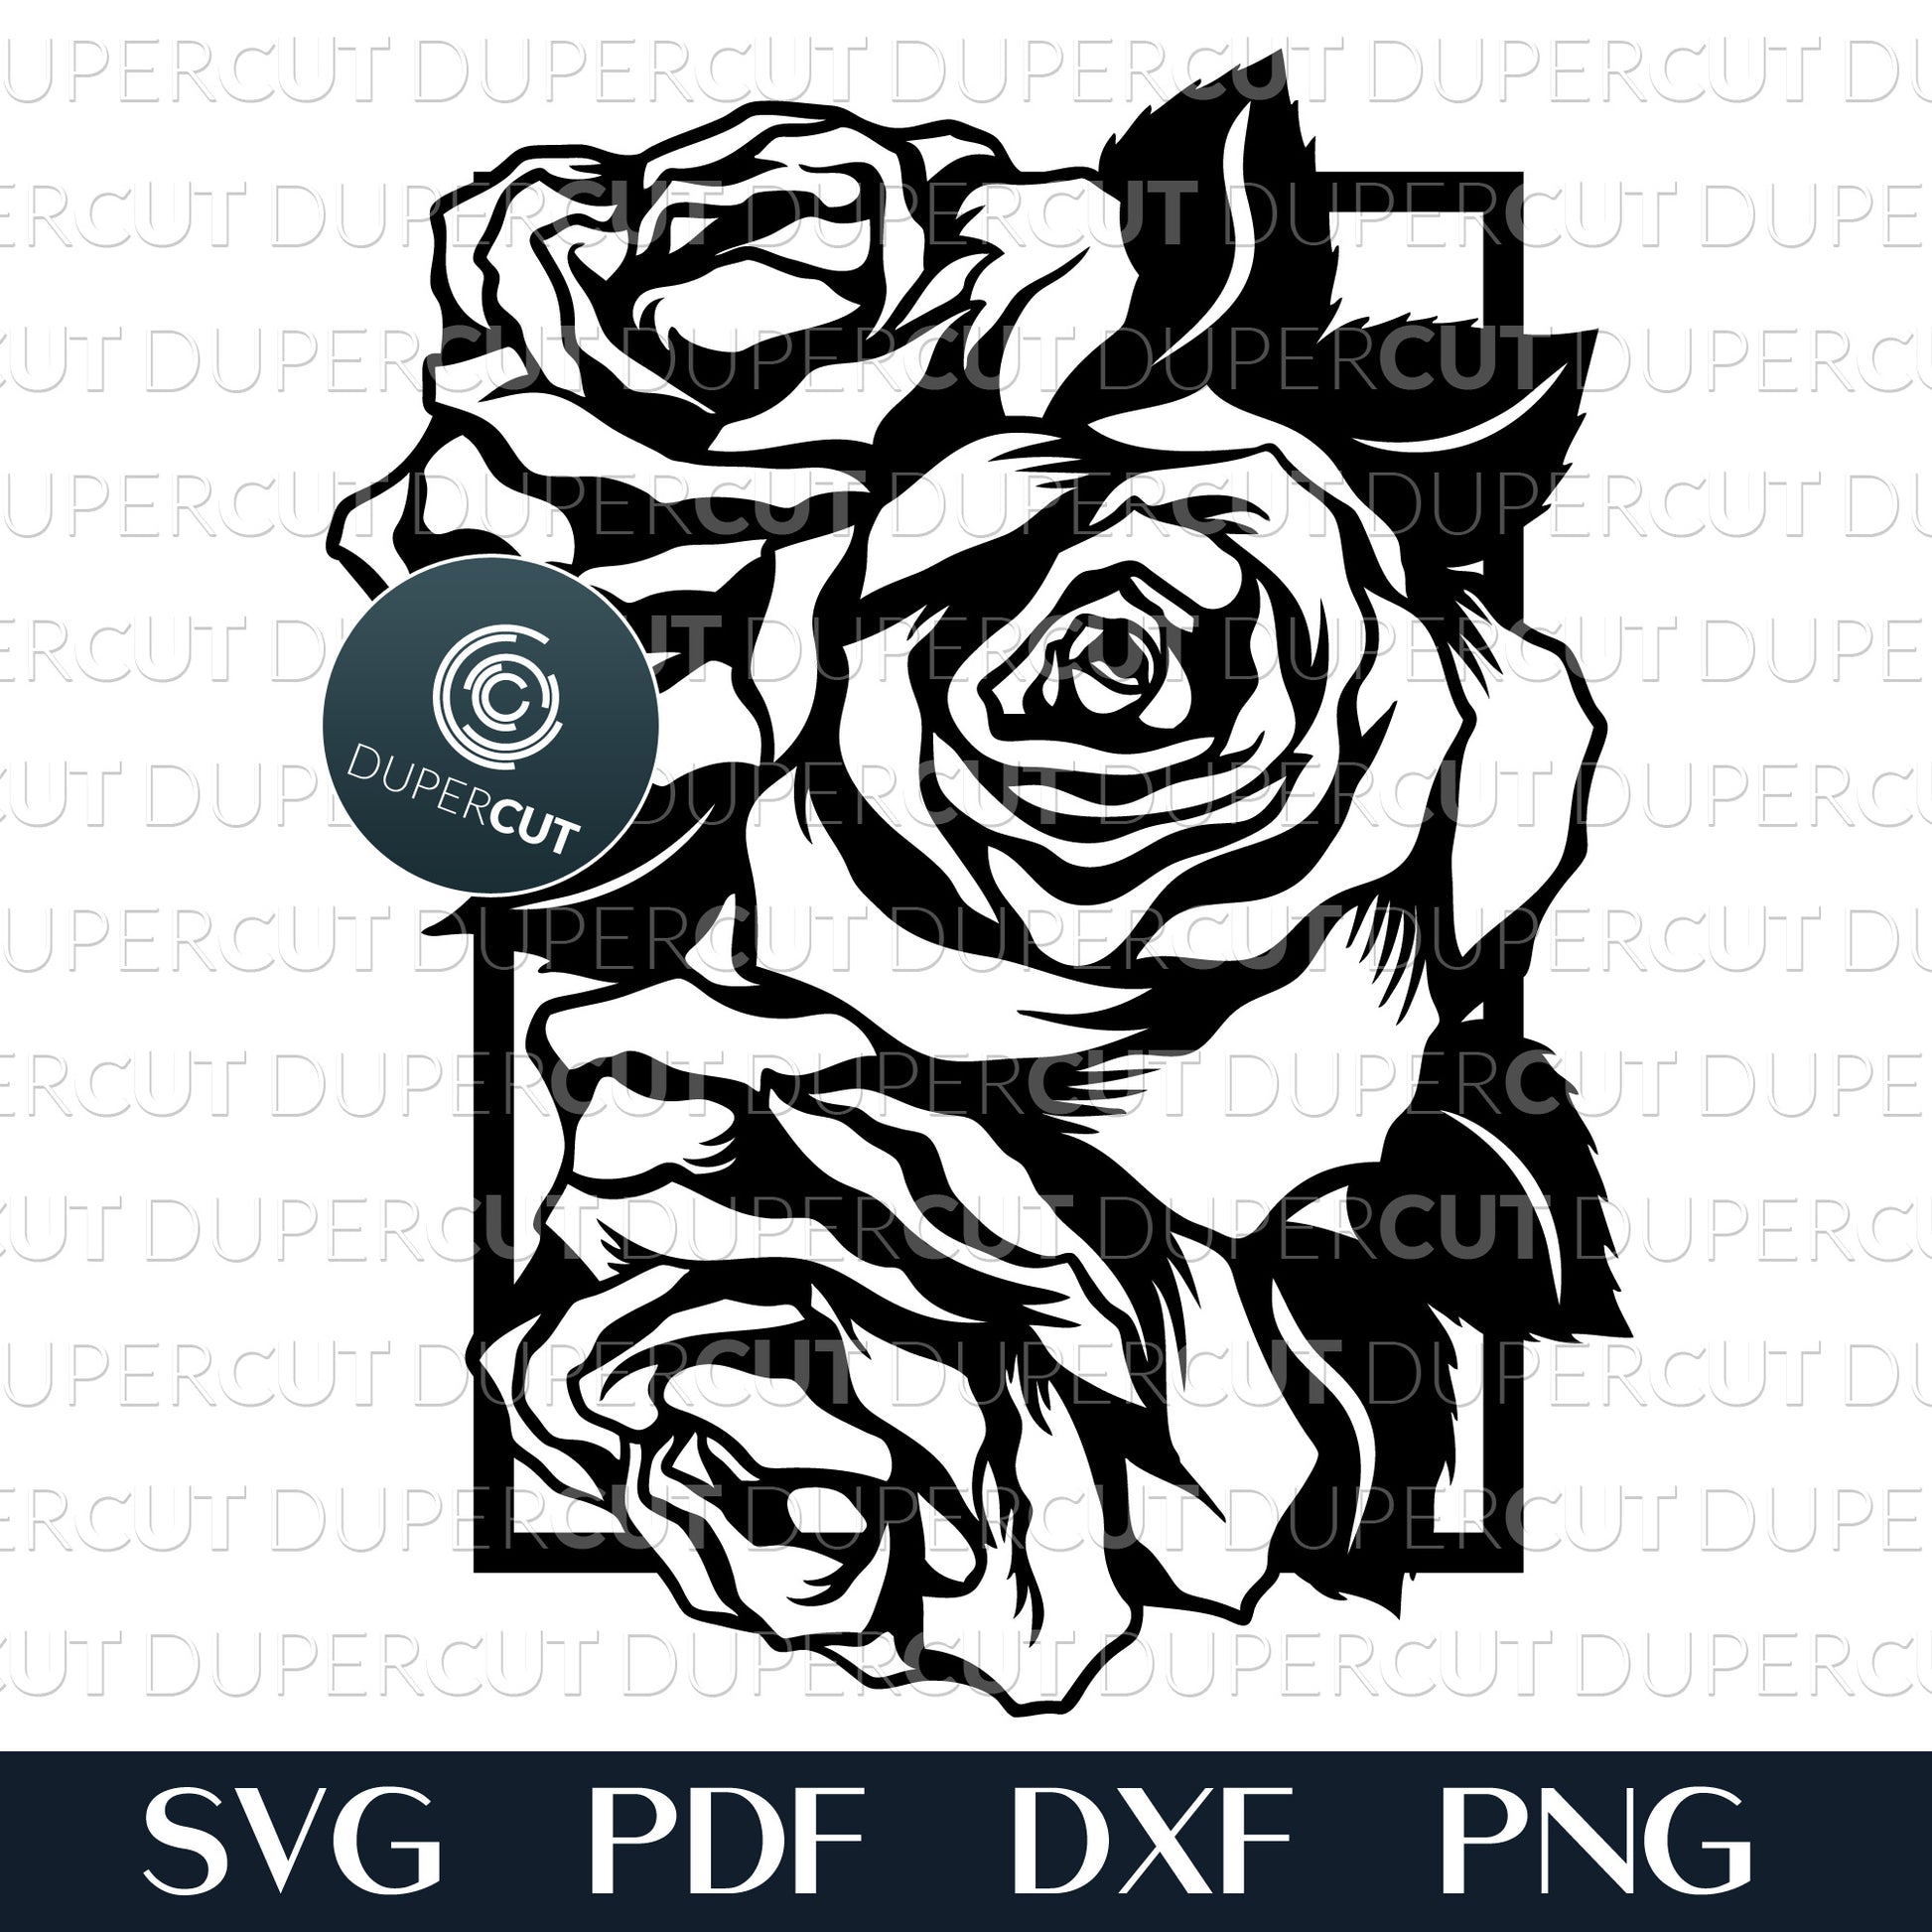 Rose SVG , PNG - Flower SVG Cut Files for Cricut and silhouette